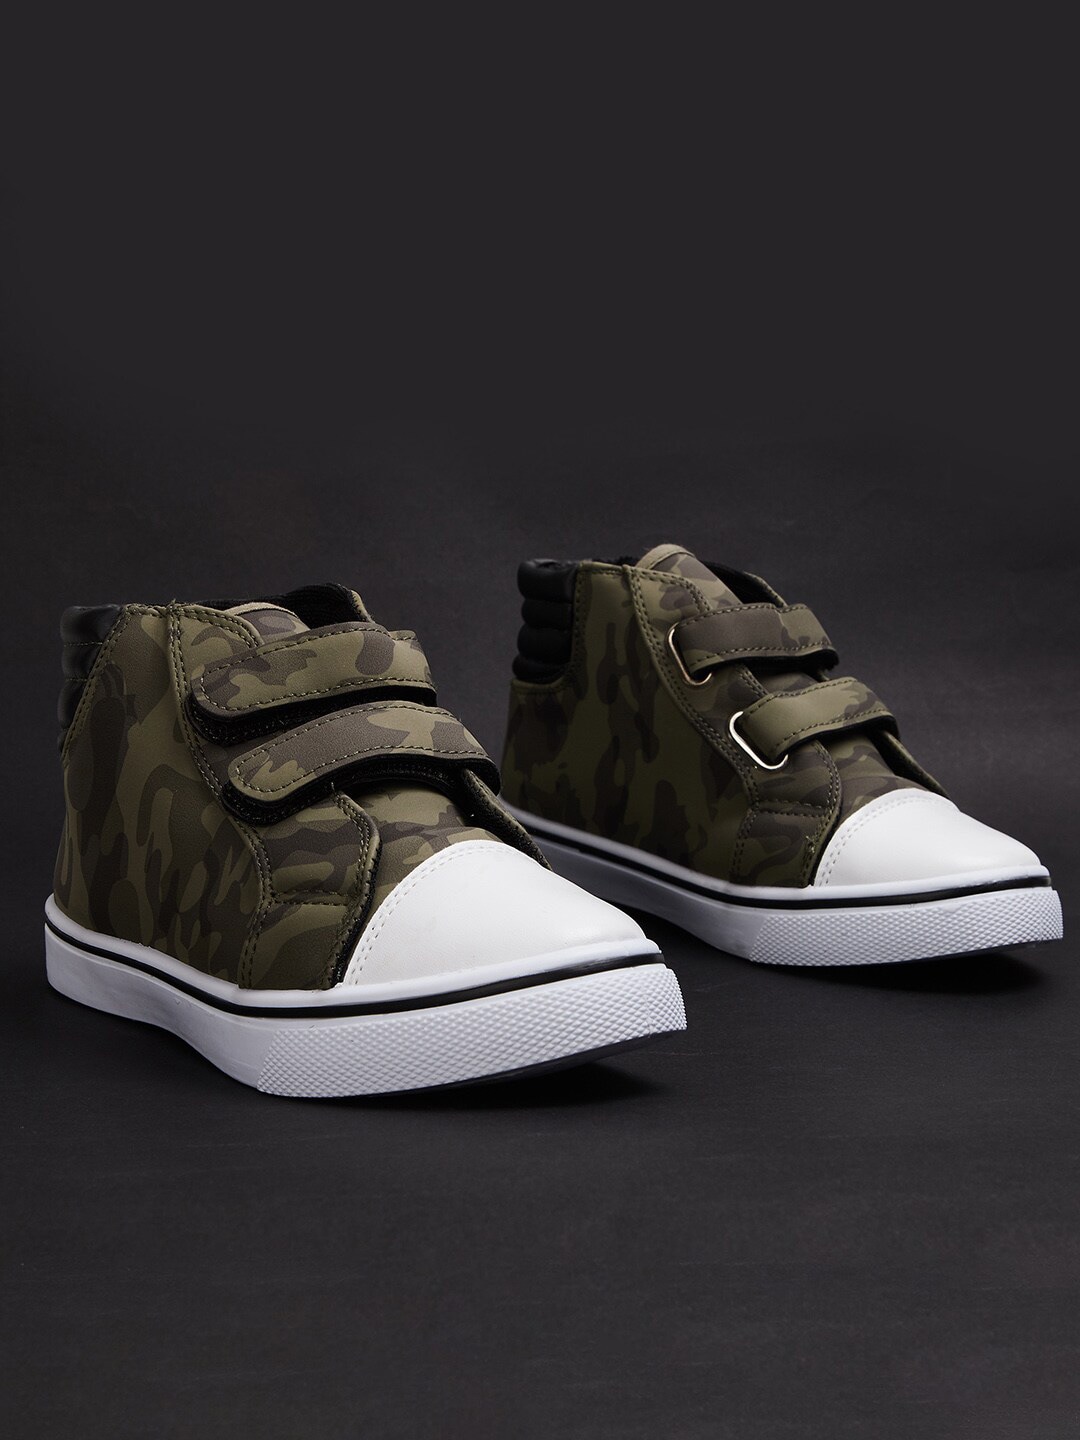 Fame Forever by Lifestyle Boys Olive Green Printed PU Slip-On Sneakers